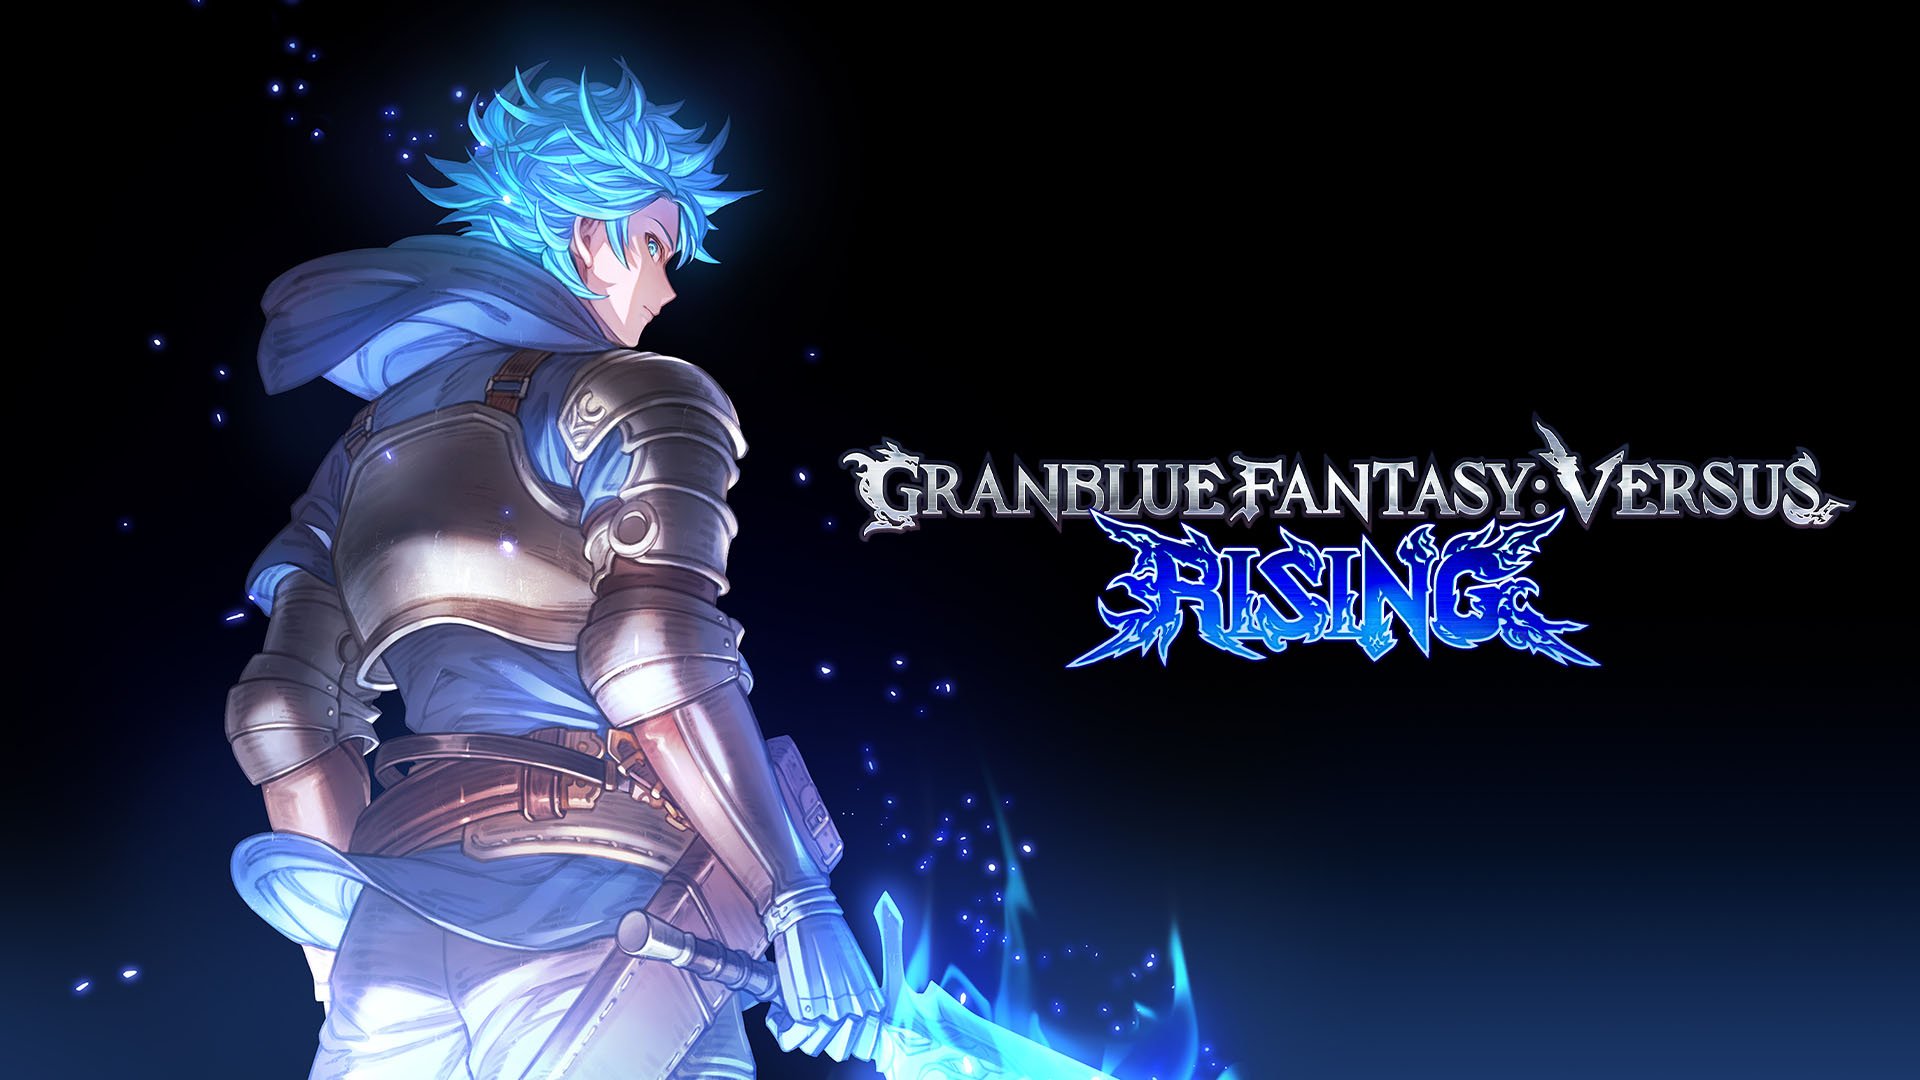 Granblue Fantasy: Versus Rising has been announced for PS5, PS4 and PC